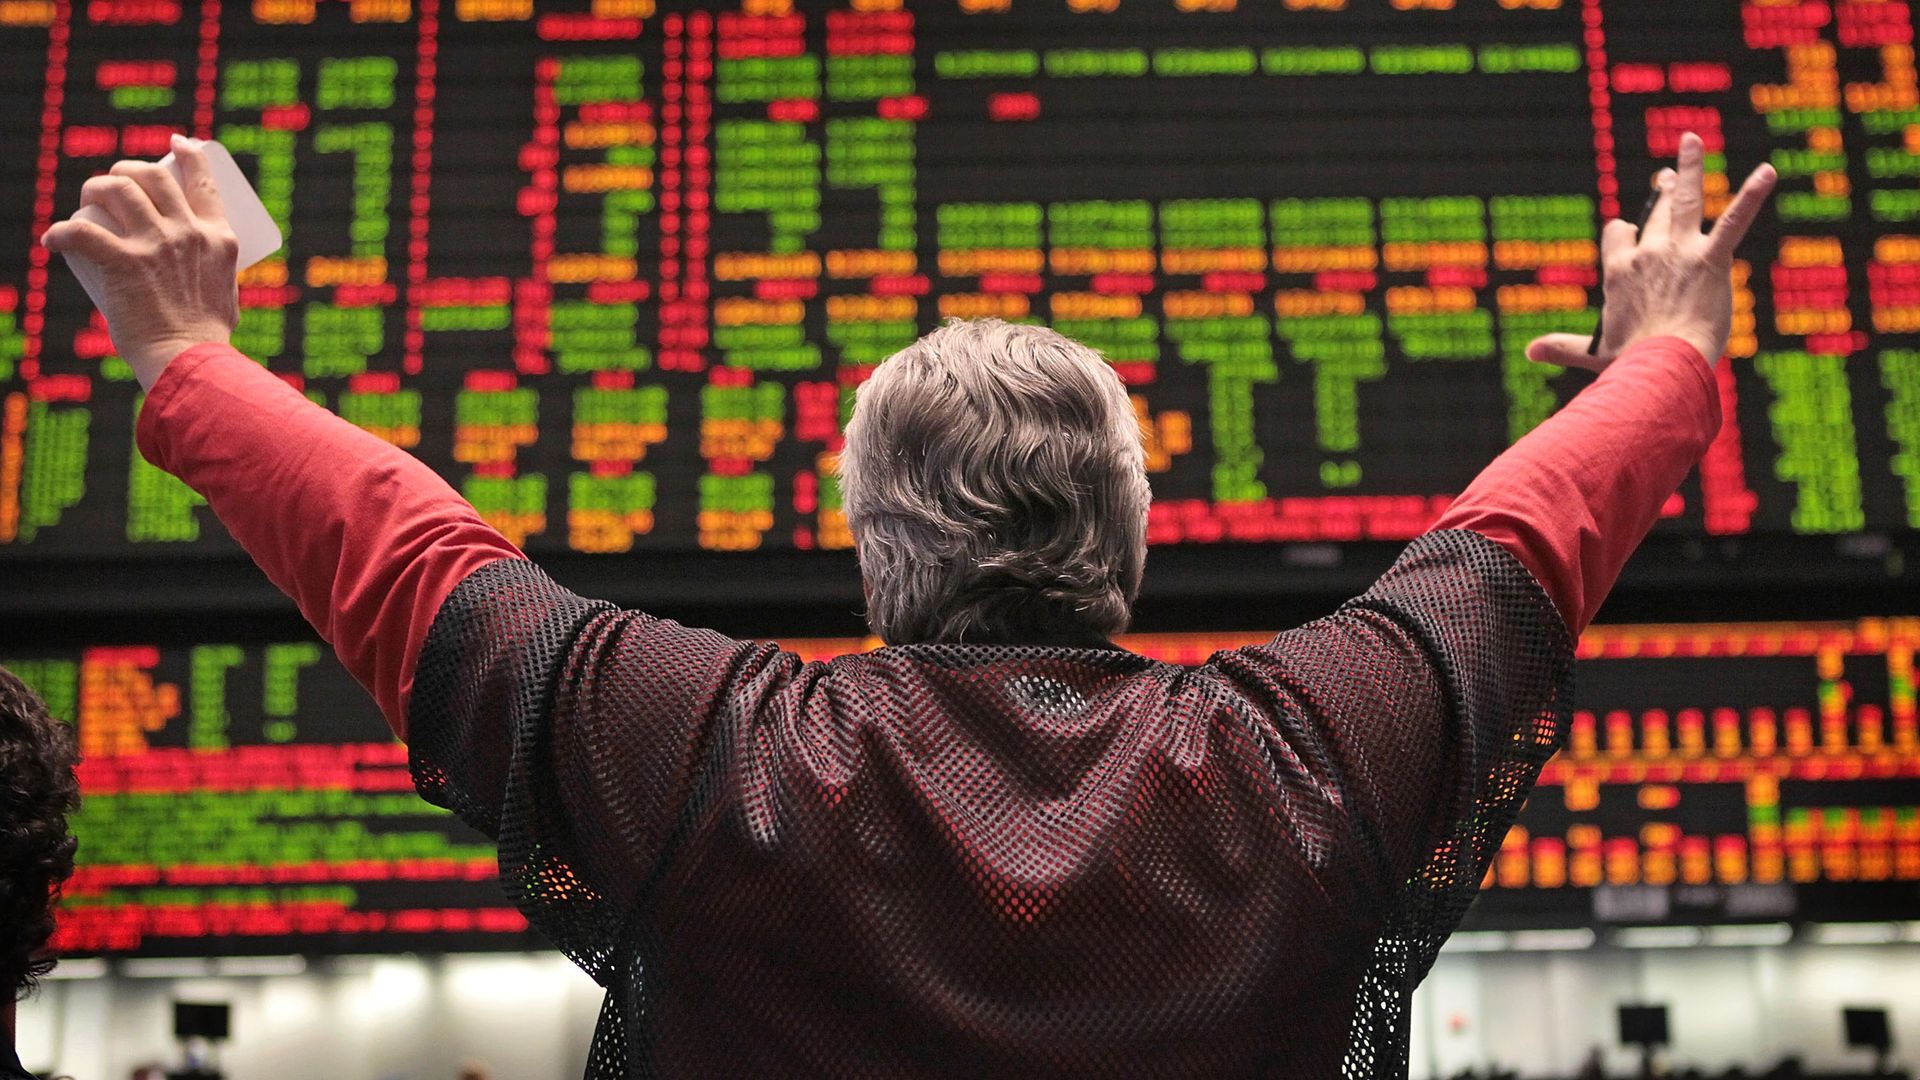 Man with back toward camera with arms in cheering position looking at the stock market ticker